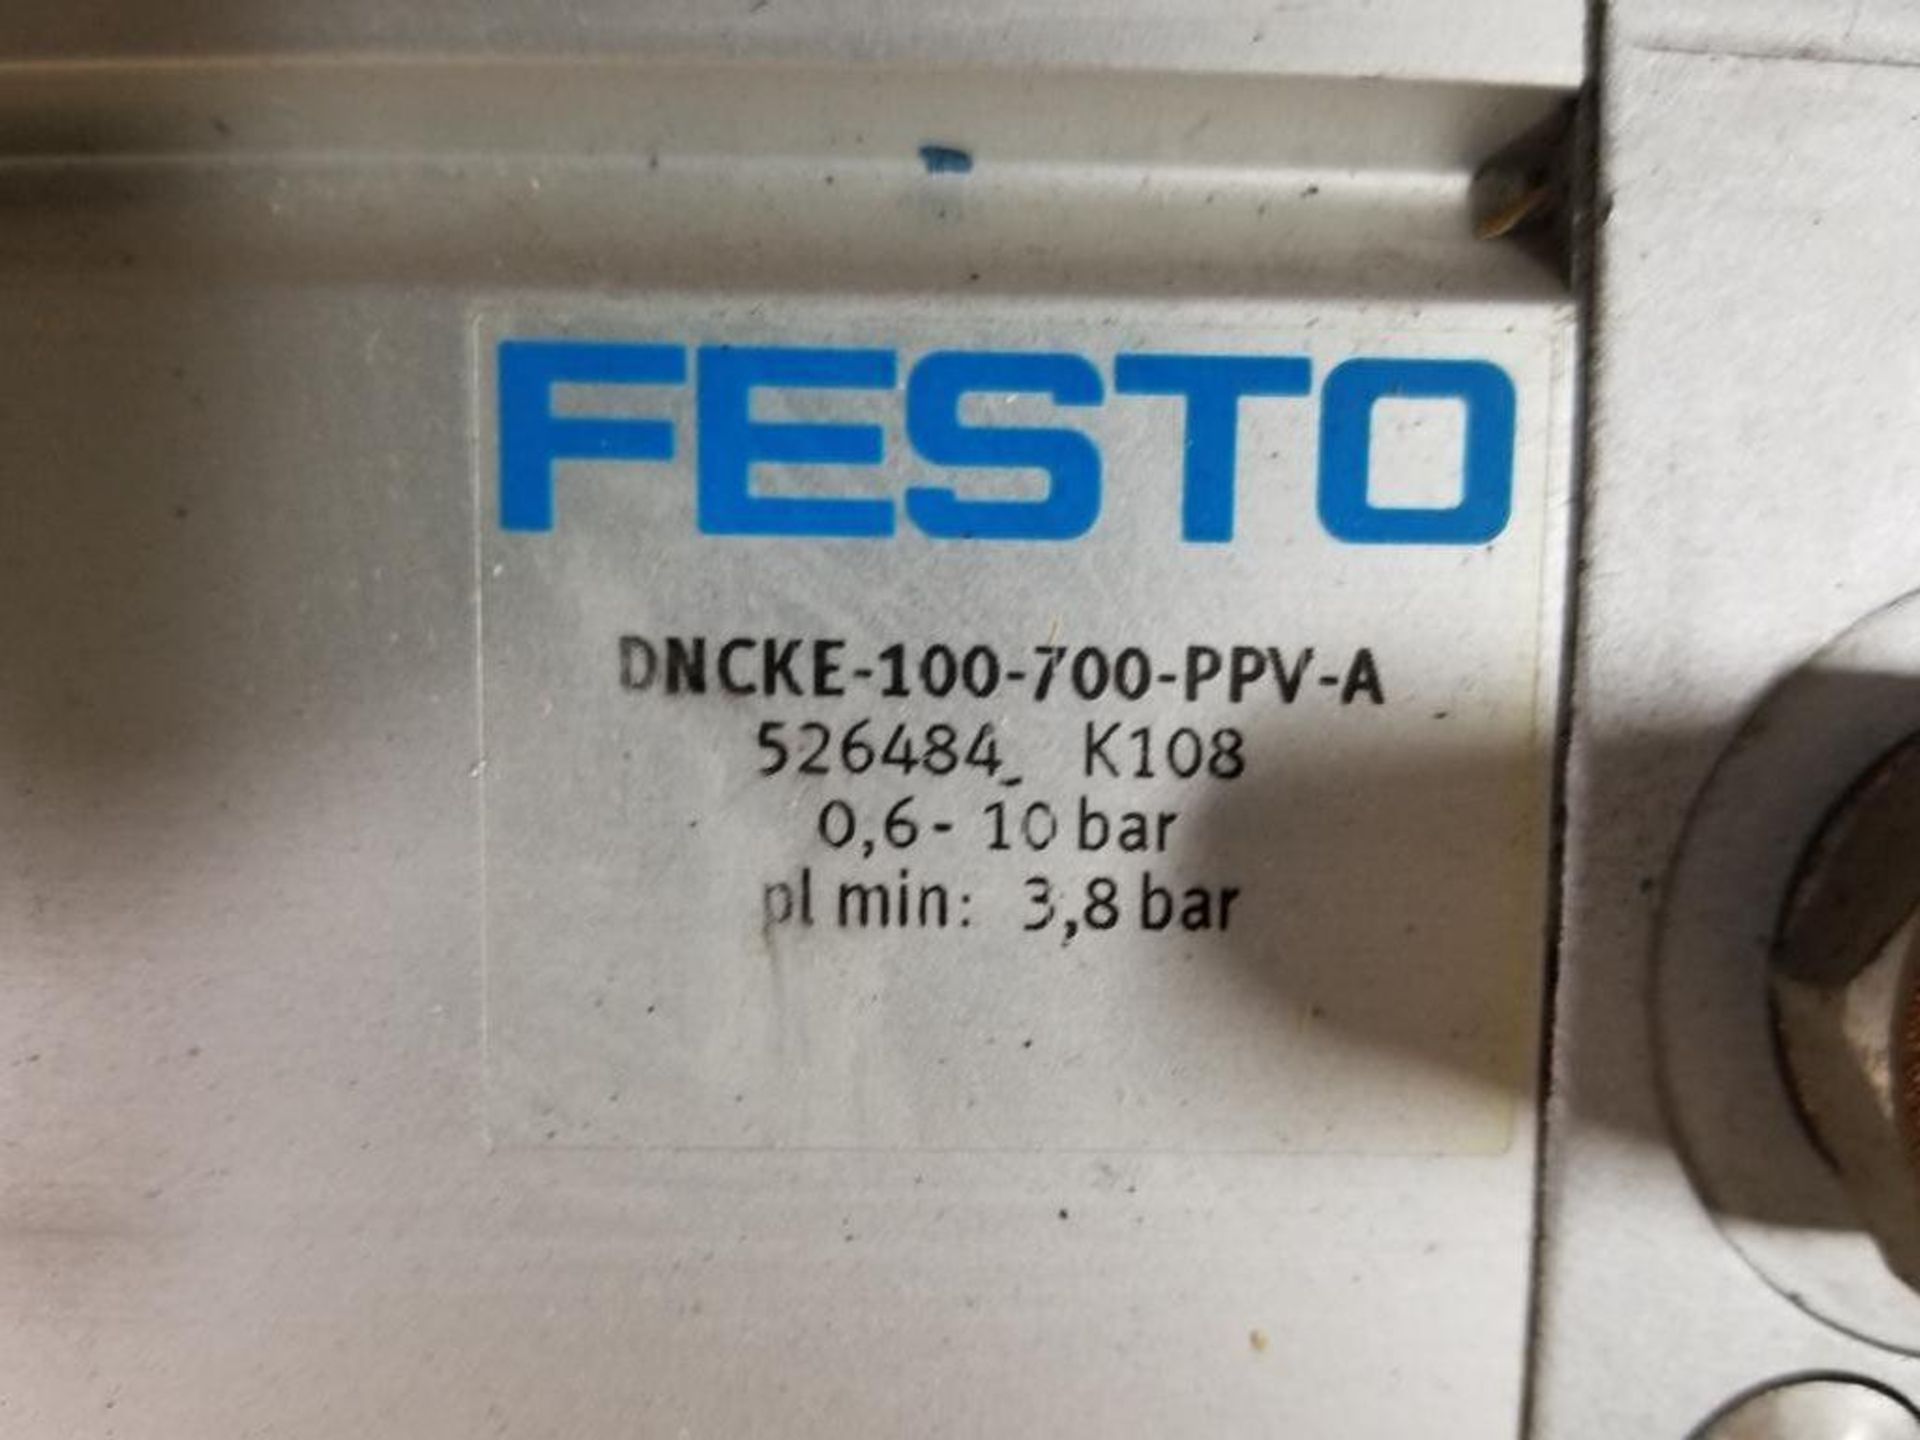 Festo DNCKE-100-700-PPV-A pneumatic cylinder. - Image 4 of 4